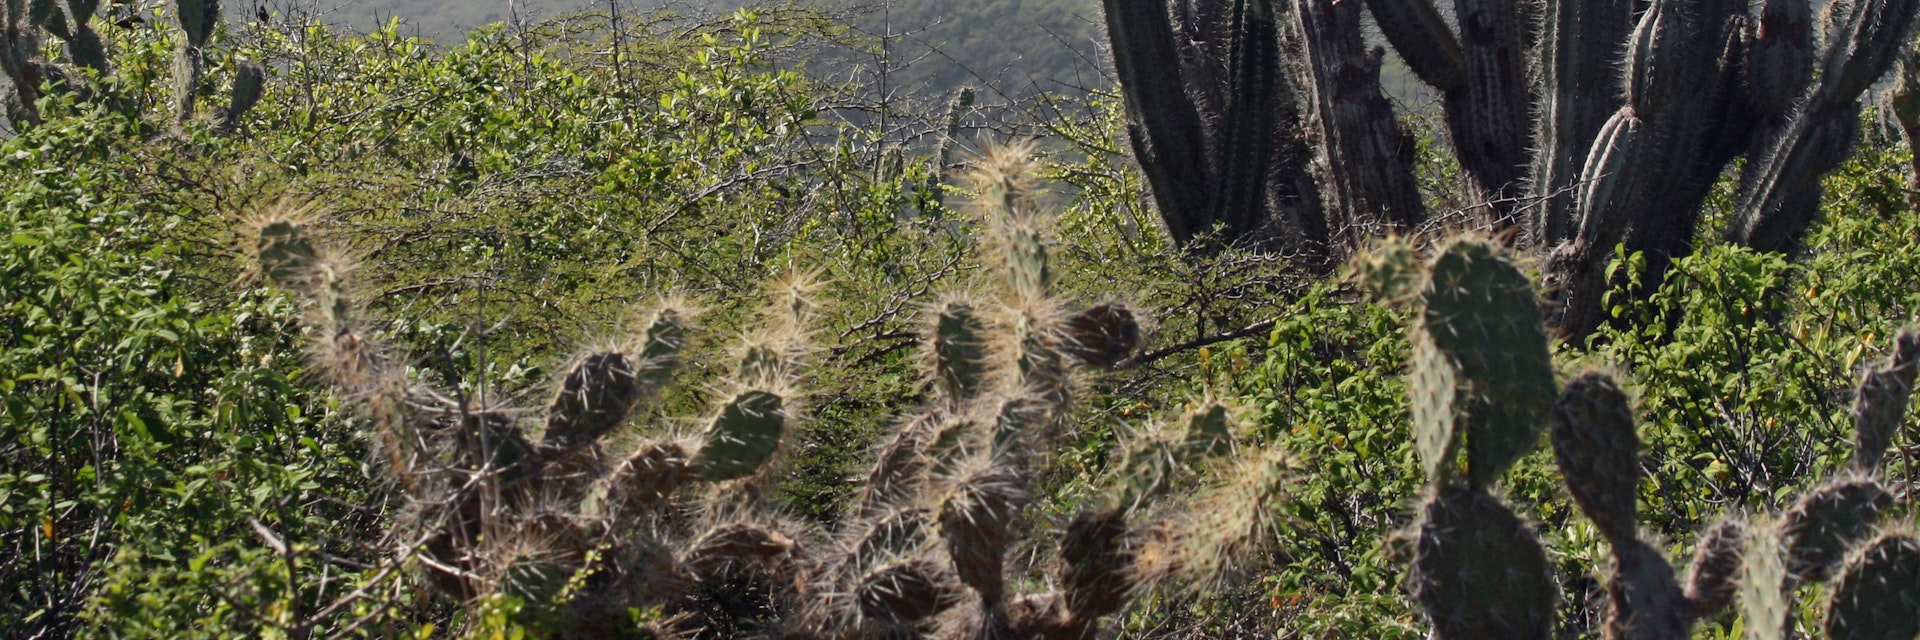 Cactus stands tall in Christoffel National Park, with Mt. Christoffel in the background, Curacao. (Marjie Lambert/Miami Herald/MCT)